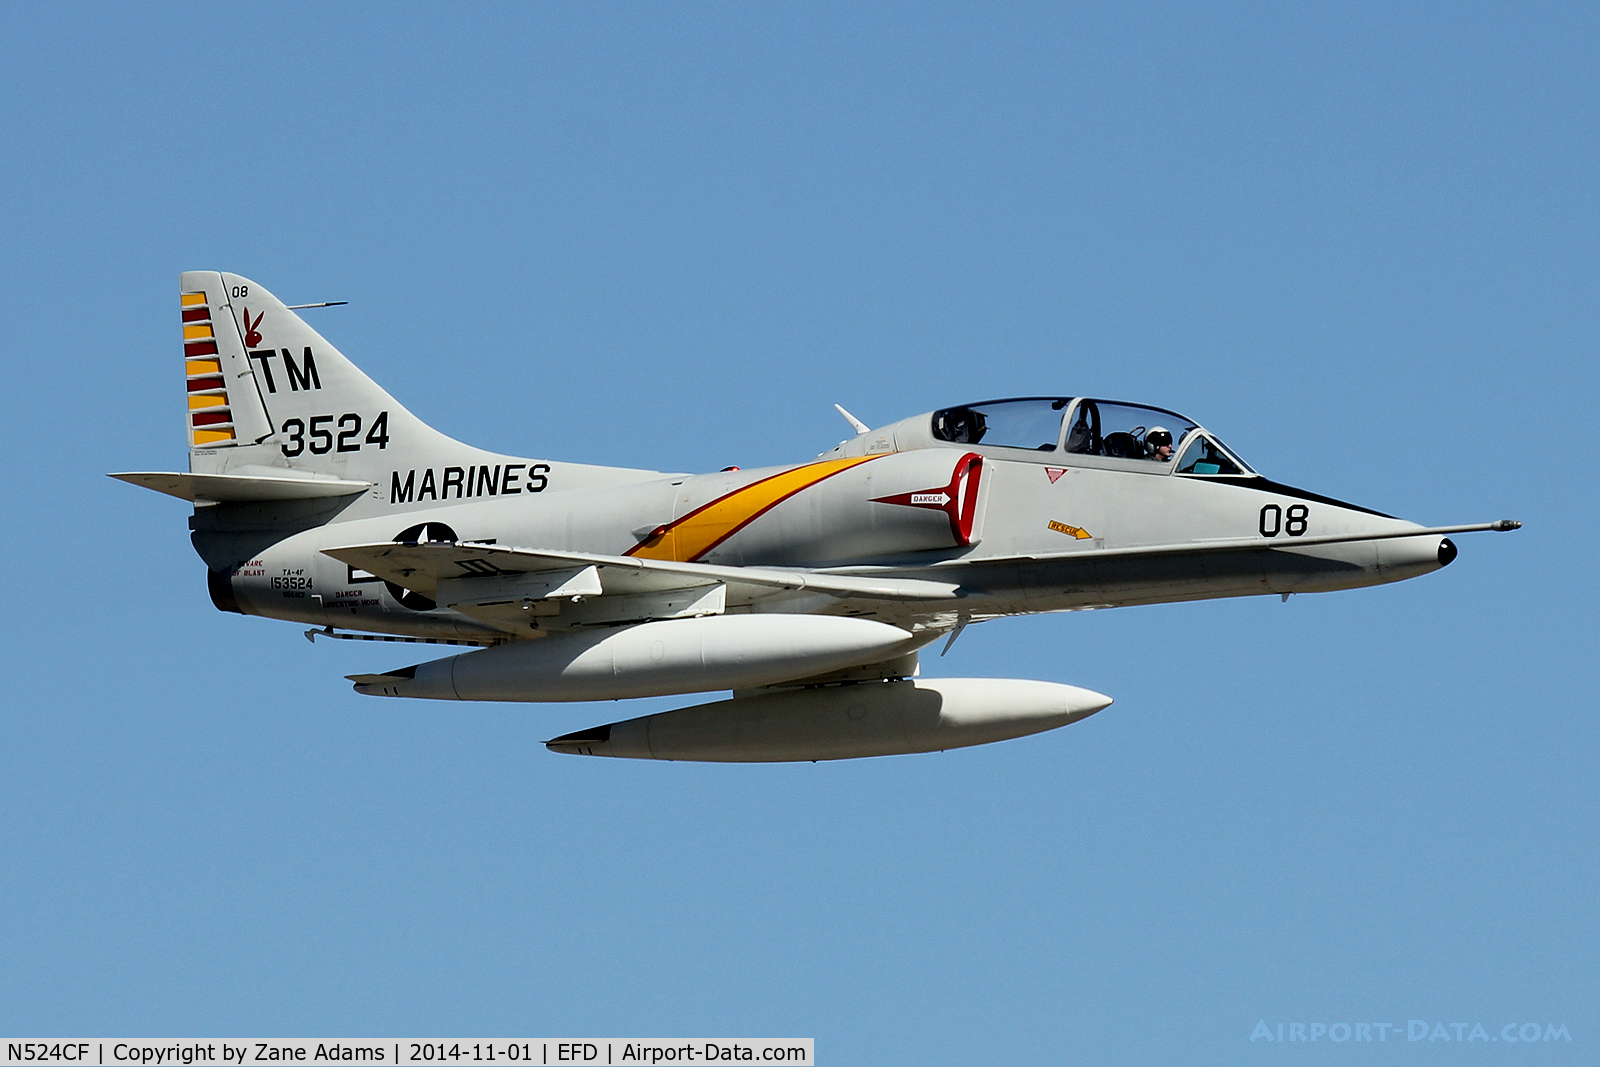 N524CF, 1967 Douglas TA-4F Skyhawk C/N 13590, The Collings Foundation TA-4F at the 2015 Wings Over Houston Airshow